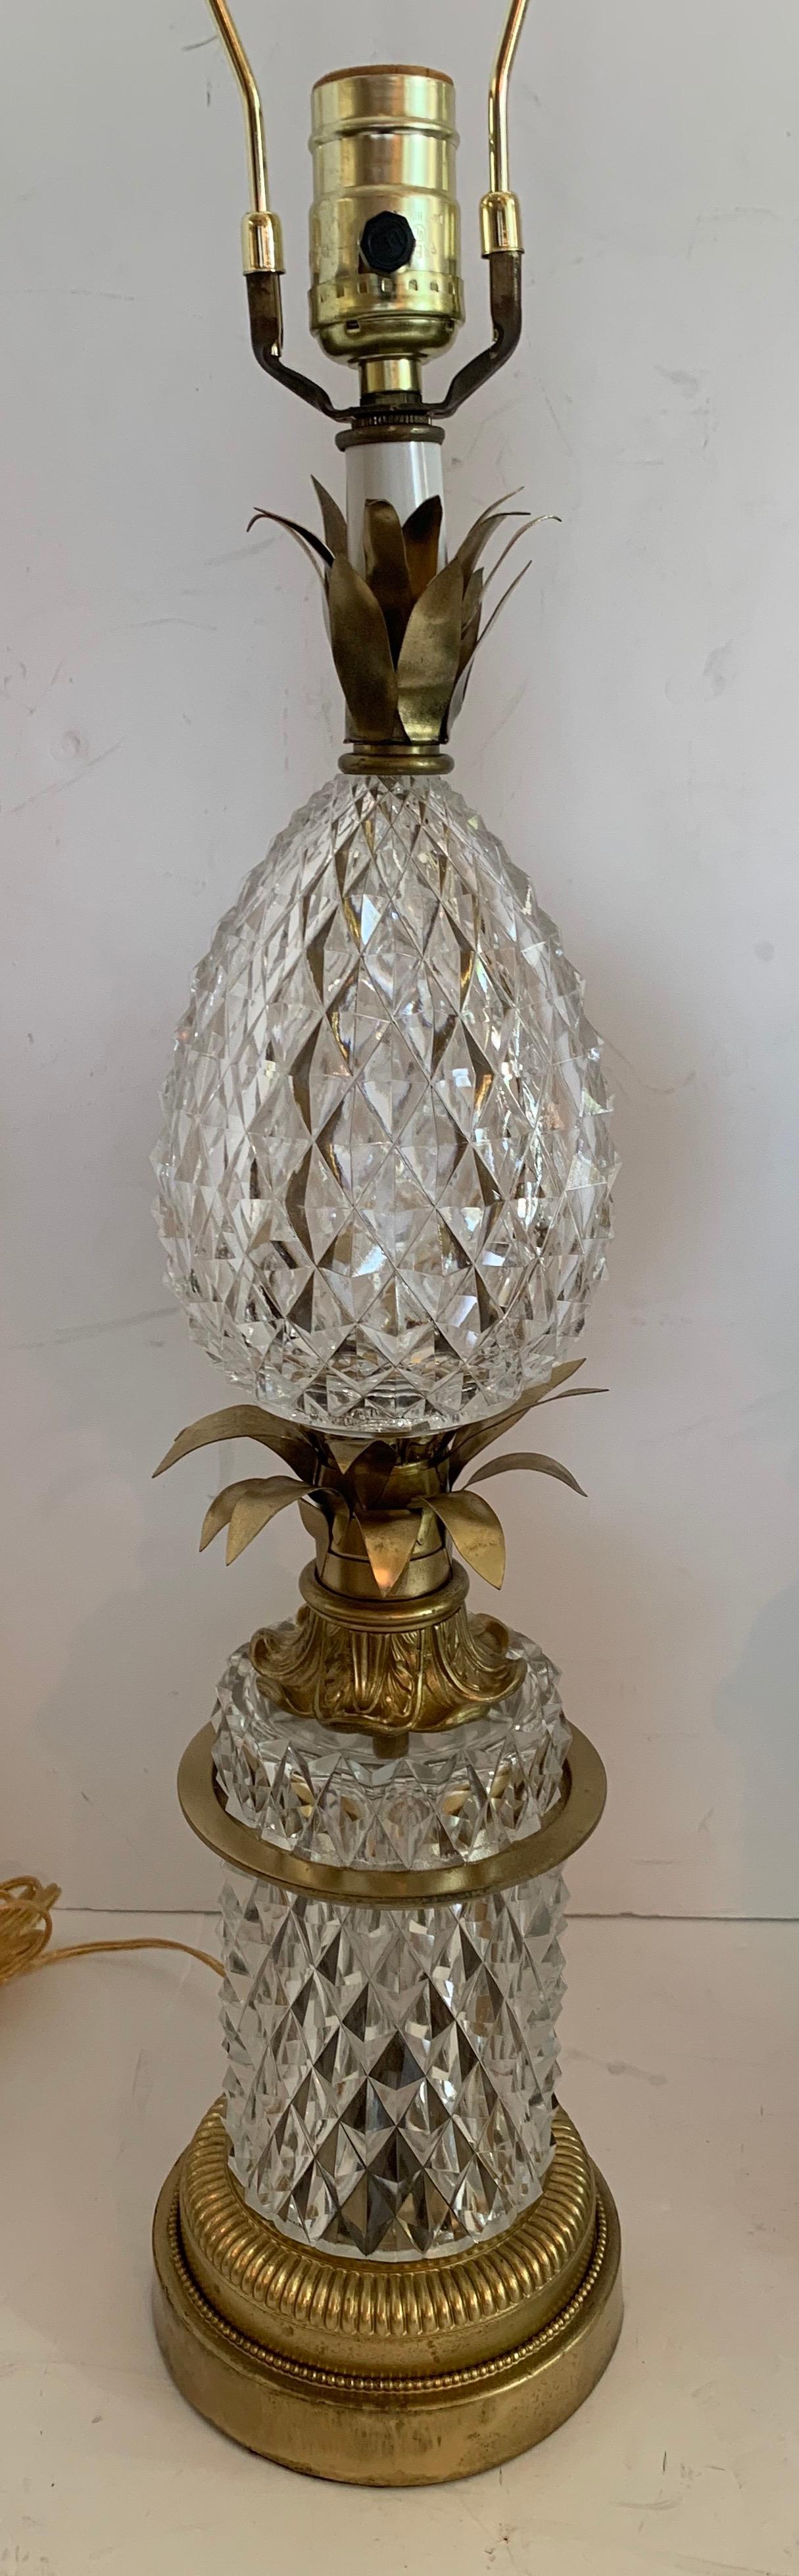 Wonderful pair of Baccarat style French cut crystal & bronze ormolu-mounted 'Pineapple' table lamps.
  